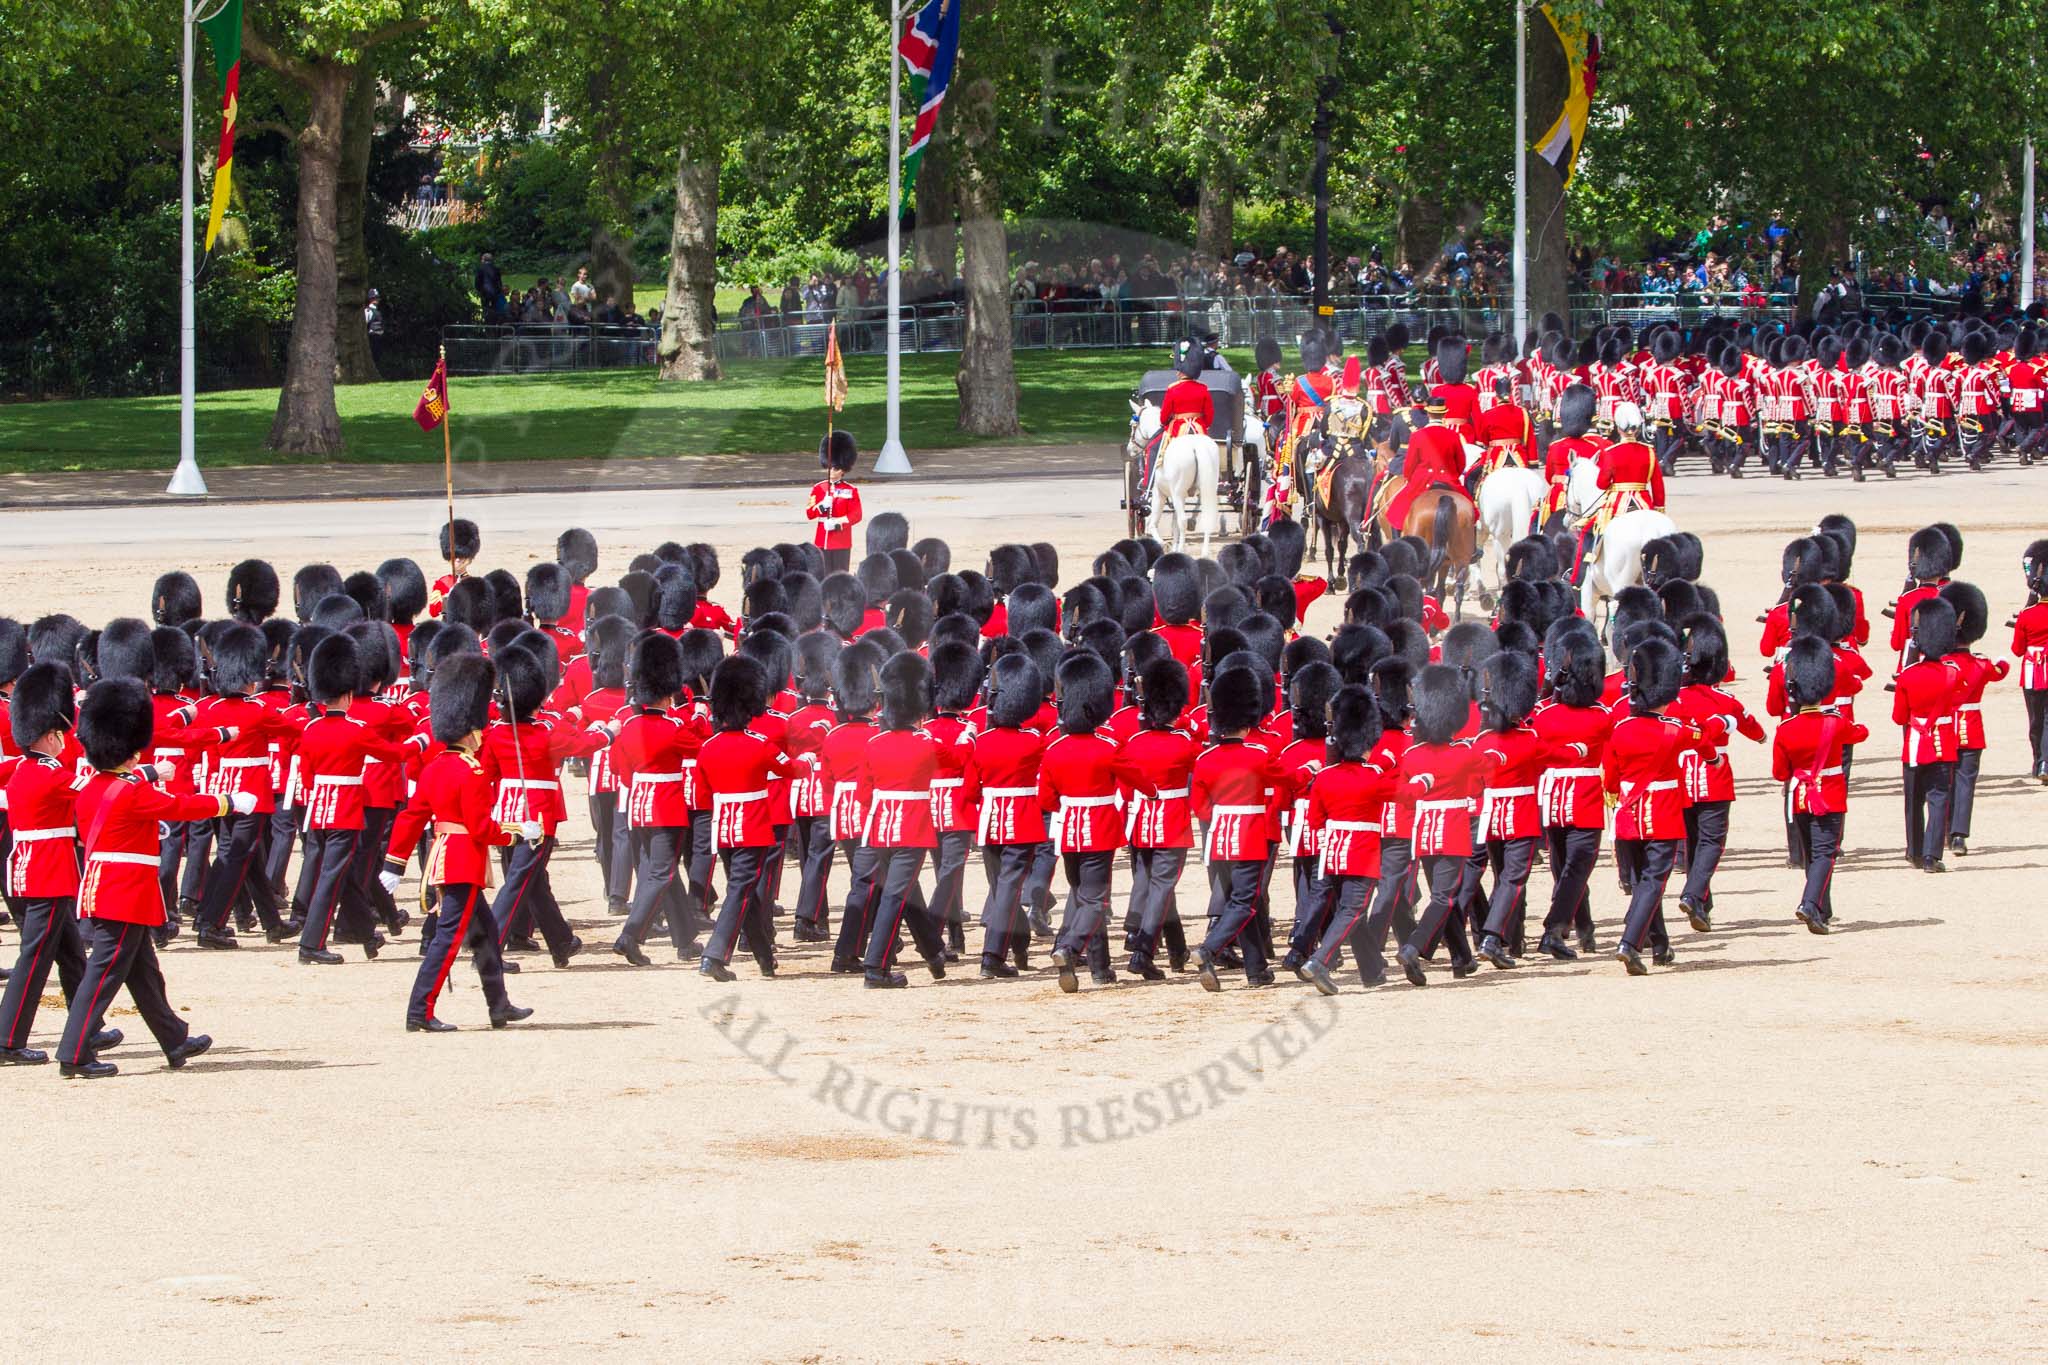 The Colonel's Review 2013.
Horse Guards Parade, Westminster,
London SW1,

United Kingdom,
on 08 June 2013 at 12:10, image #855